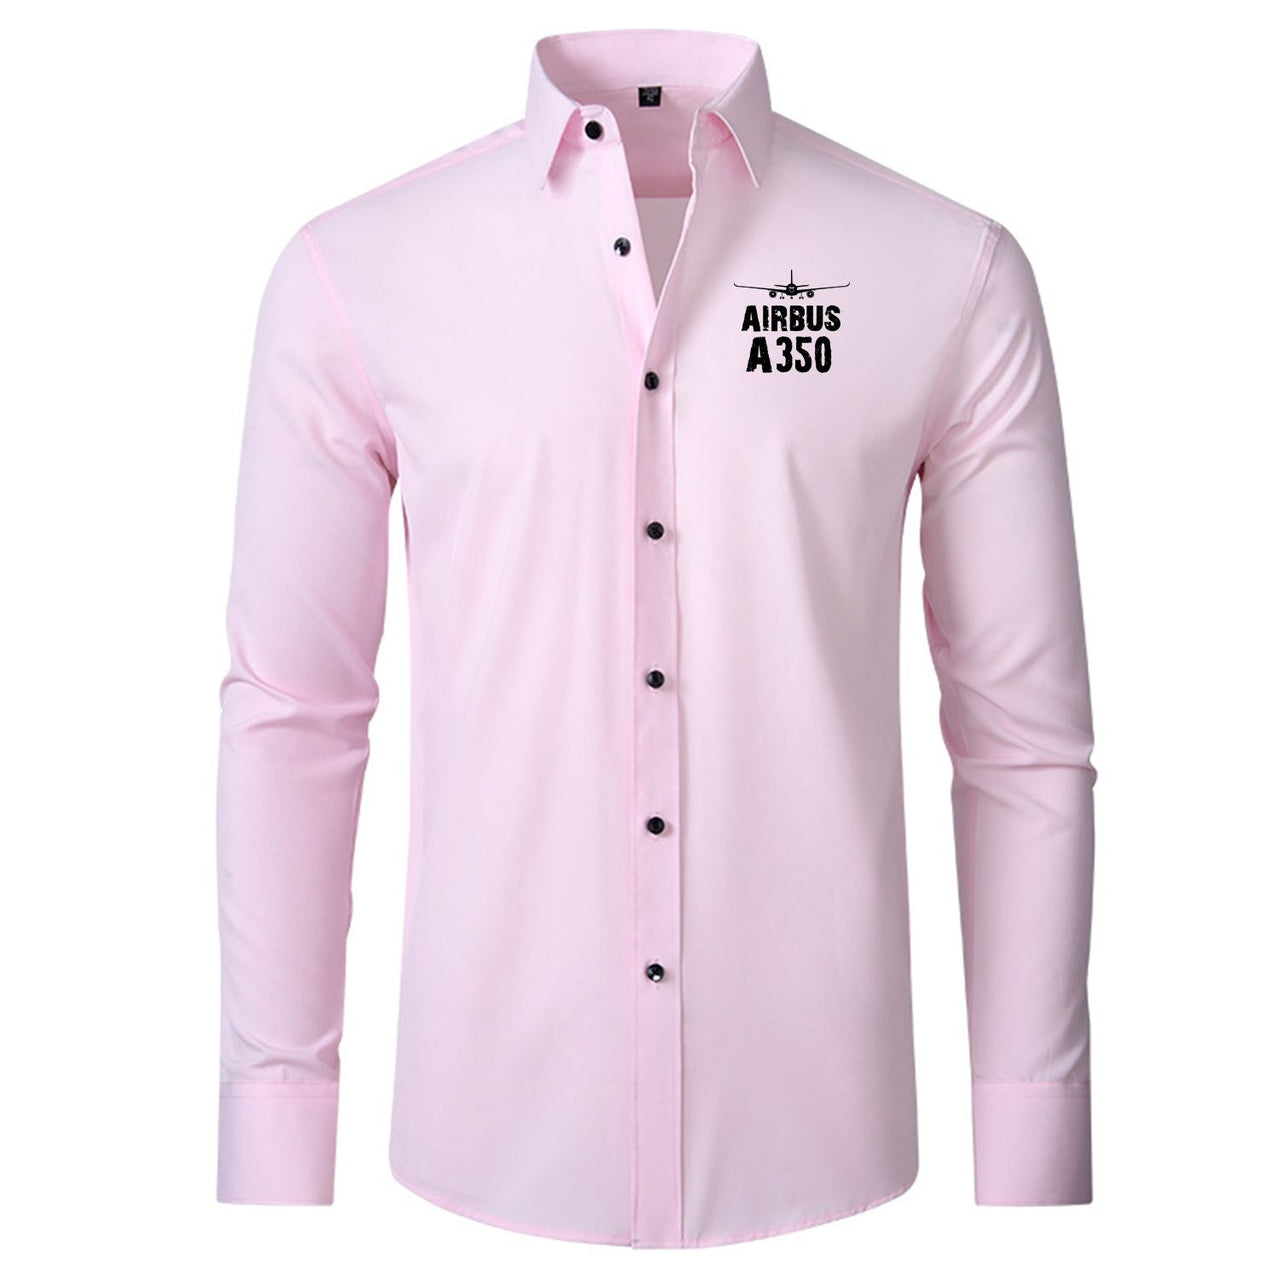 Airbus A350 & Plane Designed Long Sleeve Shirts